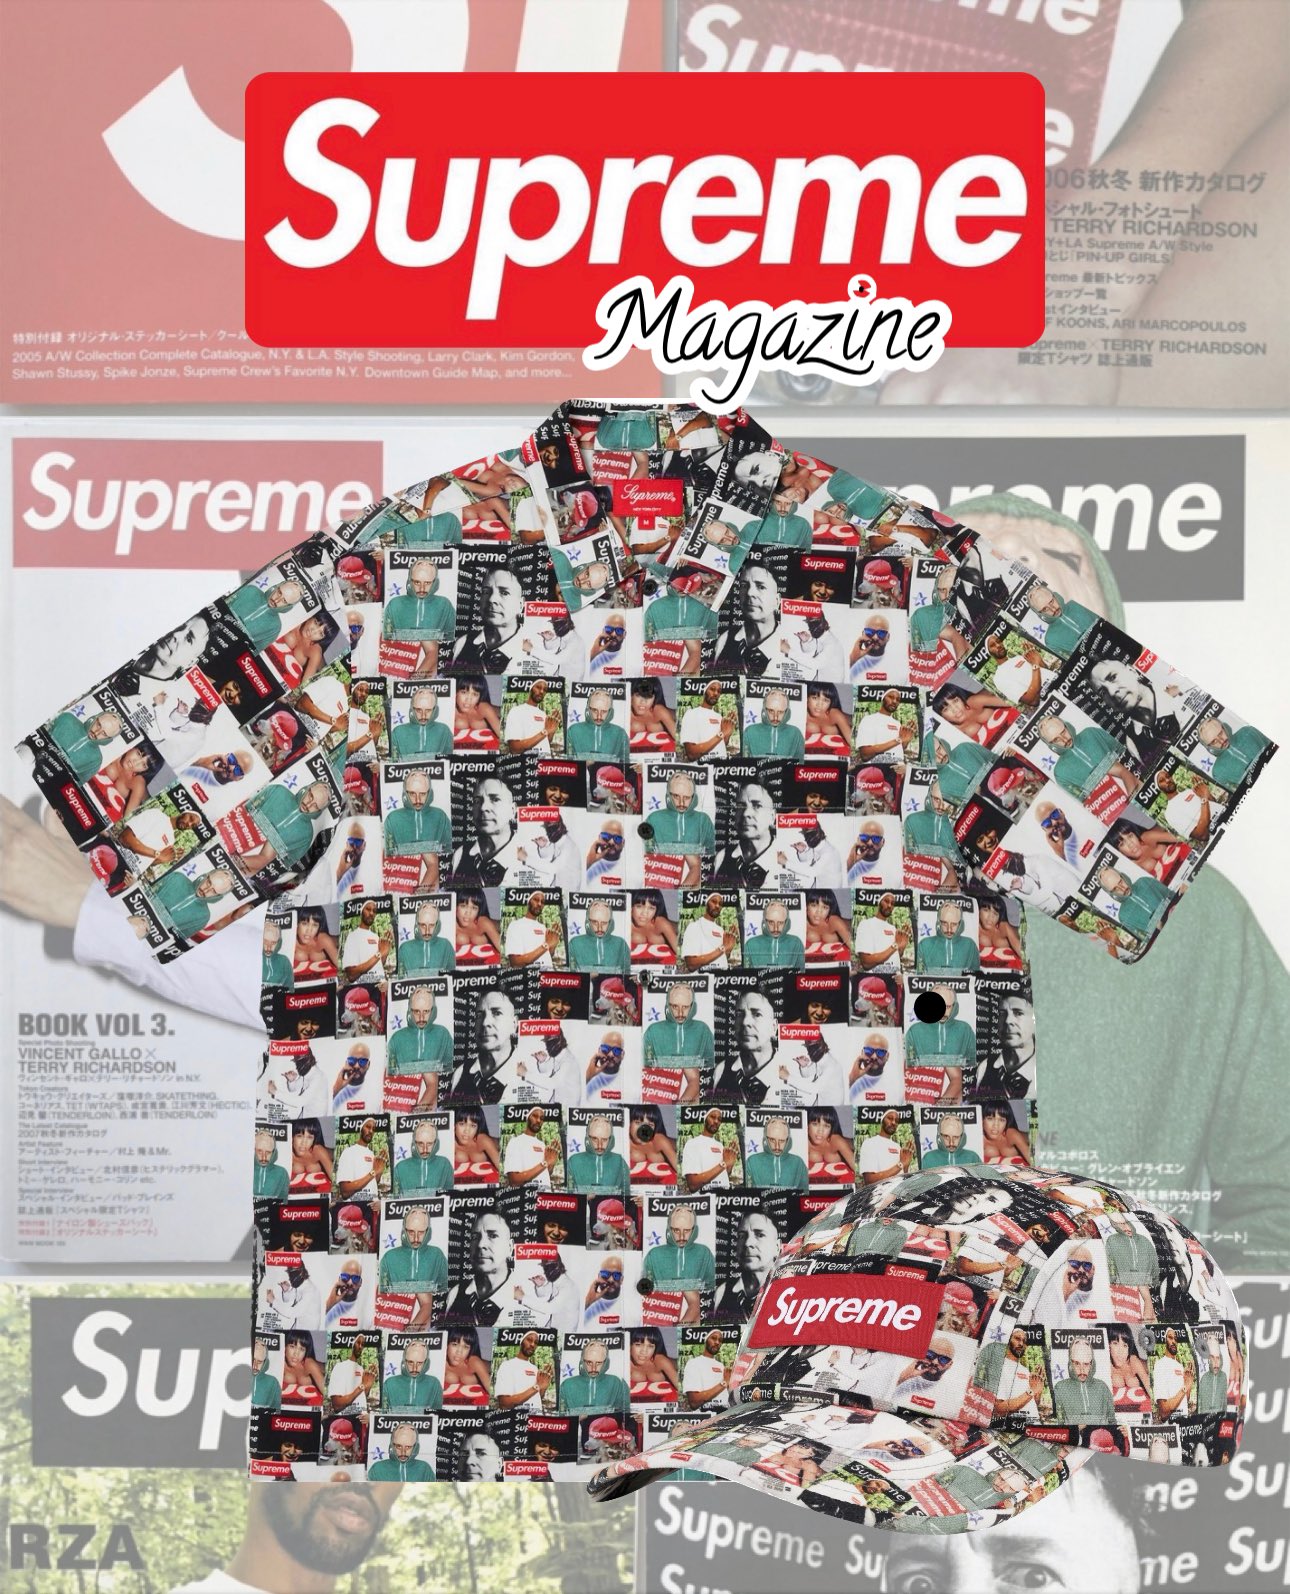 who owns supreme